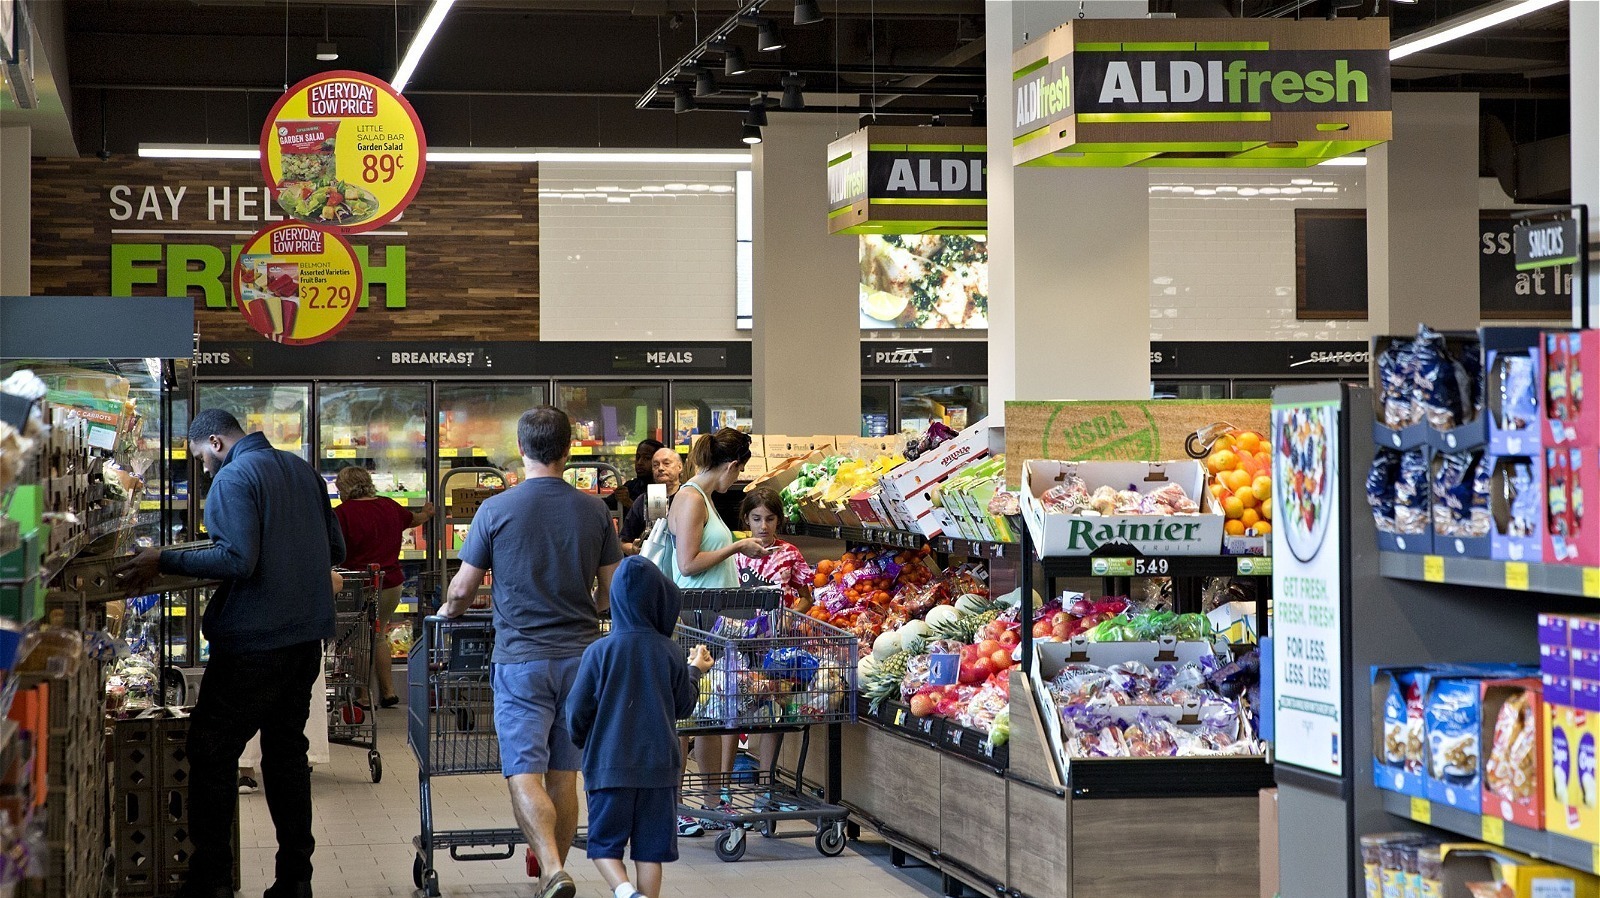 https://www.mashed.com/img/gallery/the-leftover-containers-aldi-customers-swear-by/l-intro-1656076113.jpg